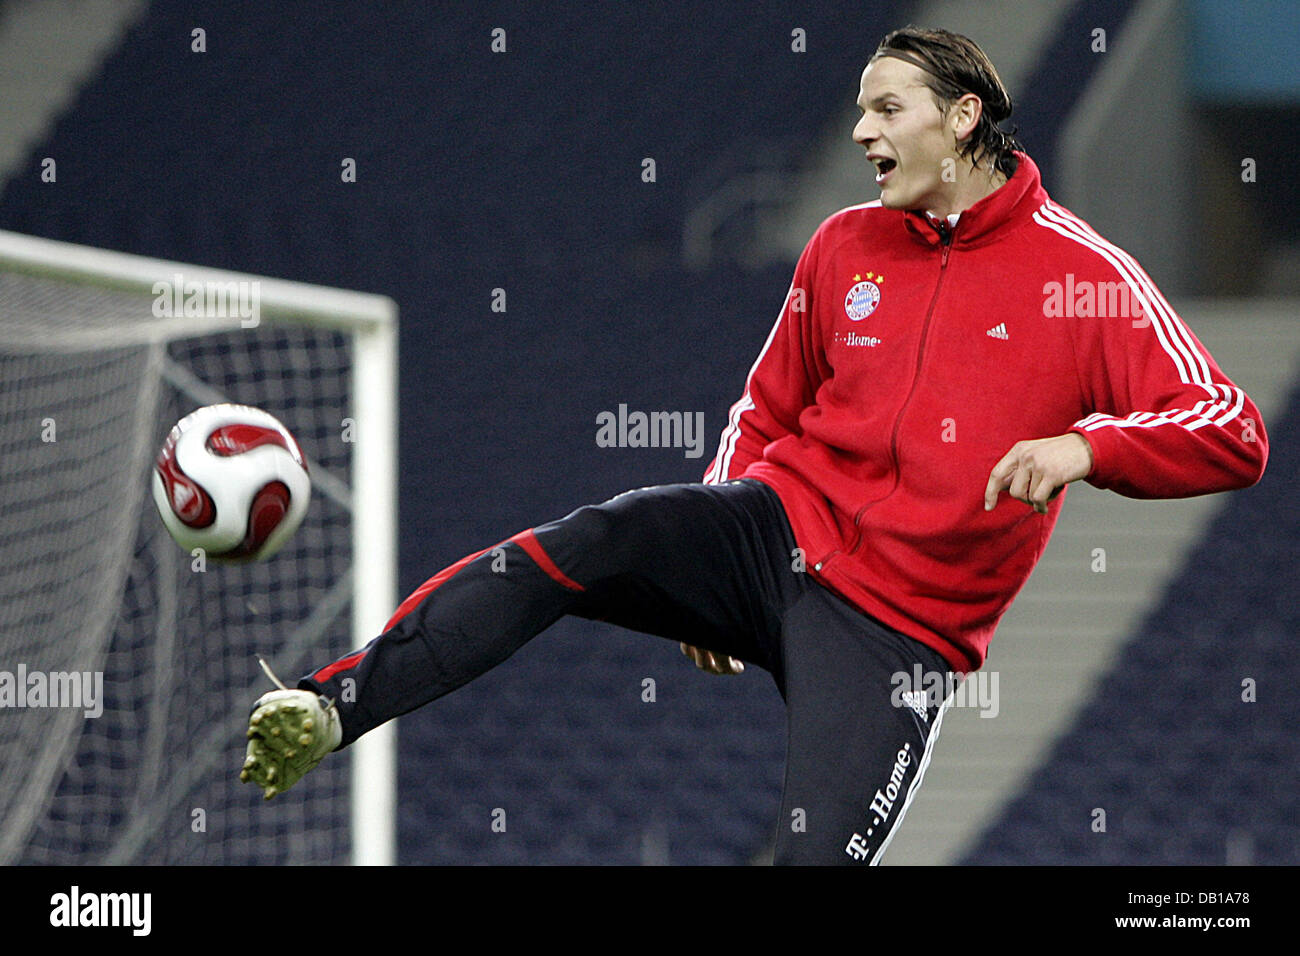 FC Bayern Munich player, Daniel van Buyten from Belgium, plays the ball during team practice at Estadio Do Dragao in Porto, Portugal, 28 November 2007. The Bundesliga table-toppers will face SC Braga in their UEFA Cup match on 29 November. Photo: Daniel Karmann Stock Photo